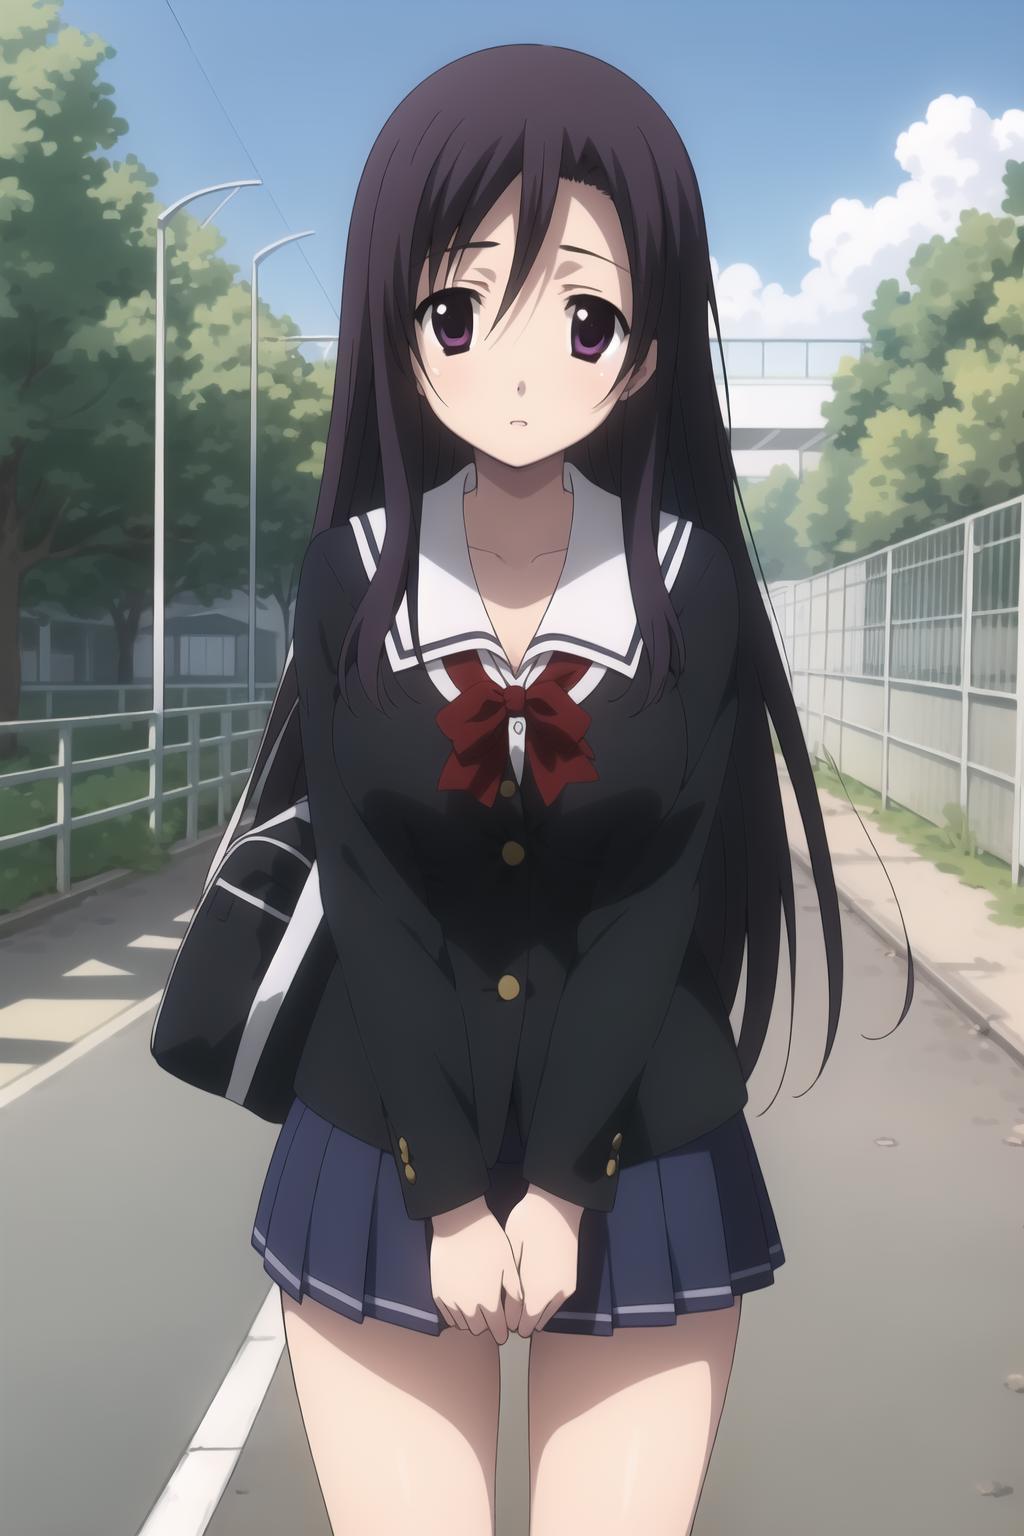 Do you remember the anime “School Days”? The anime's character Kotonoha  Katsura is debuting as a new VTuber this year on December 24th, 2020. More  details to be announced! : r/AnimeAnonymous